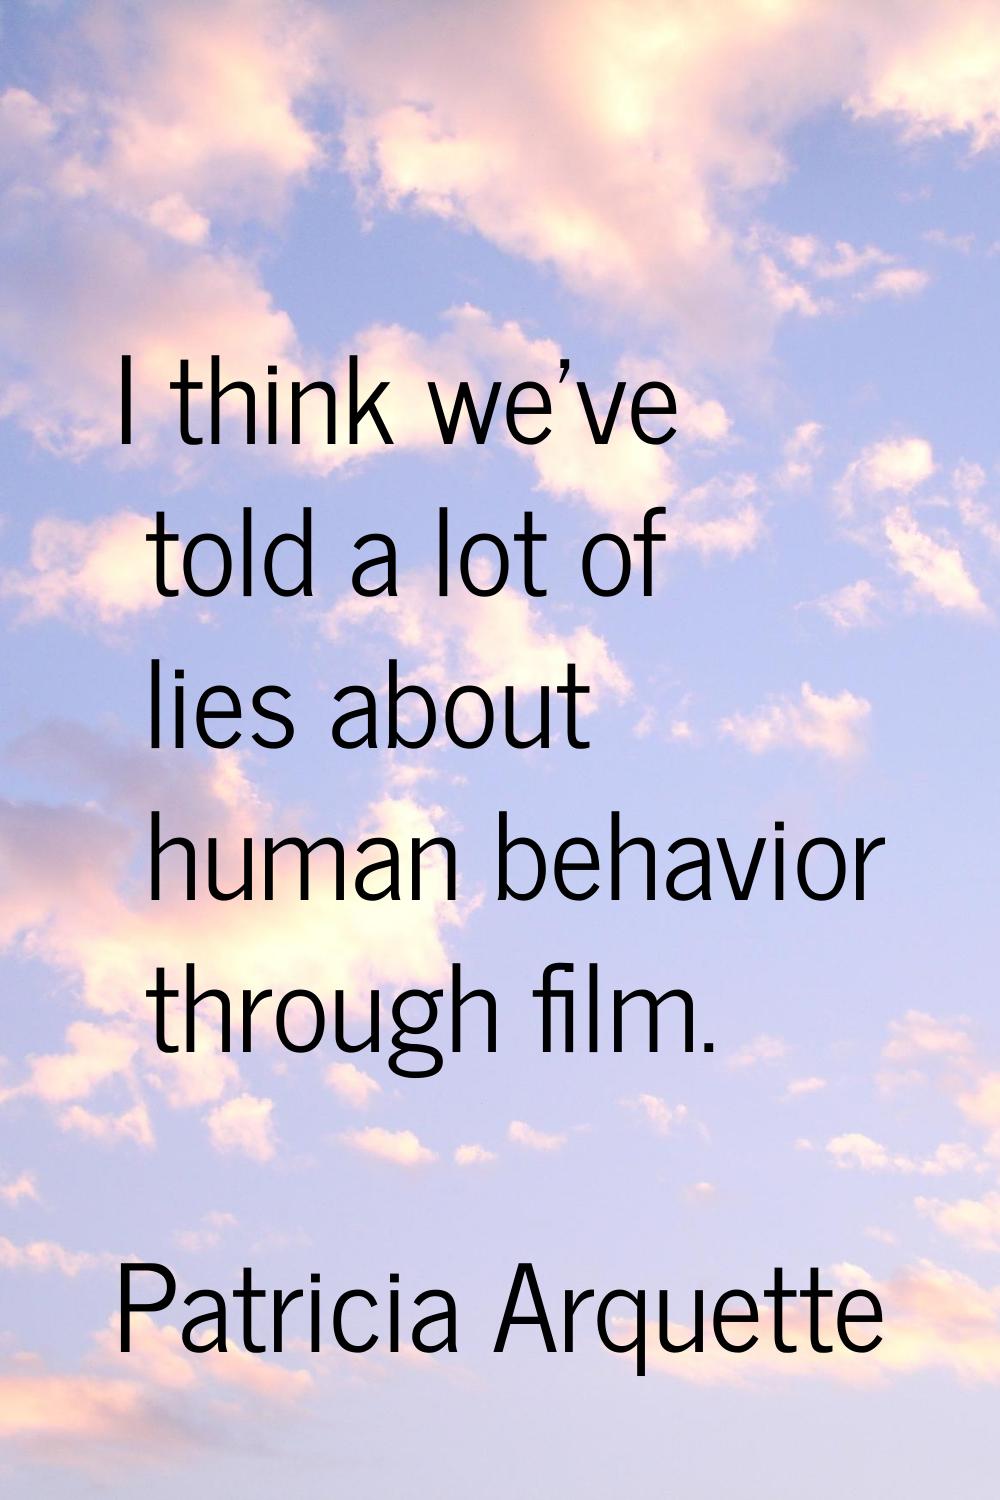 I think we've told a lot of lies about human behavior through film.